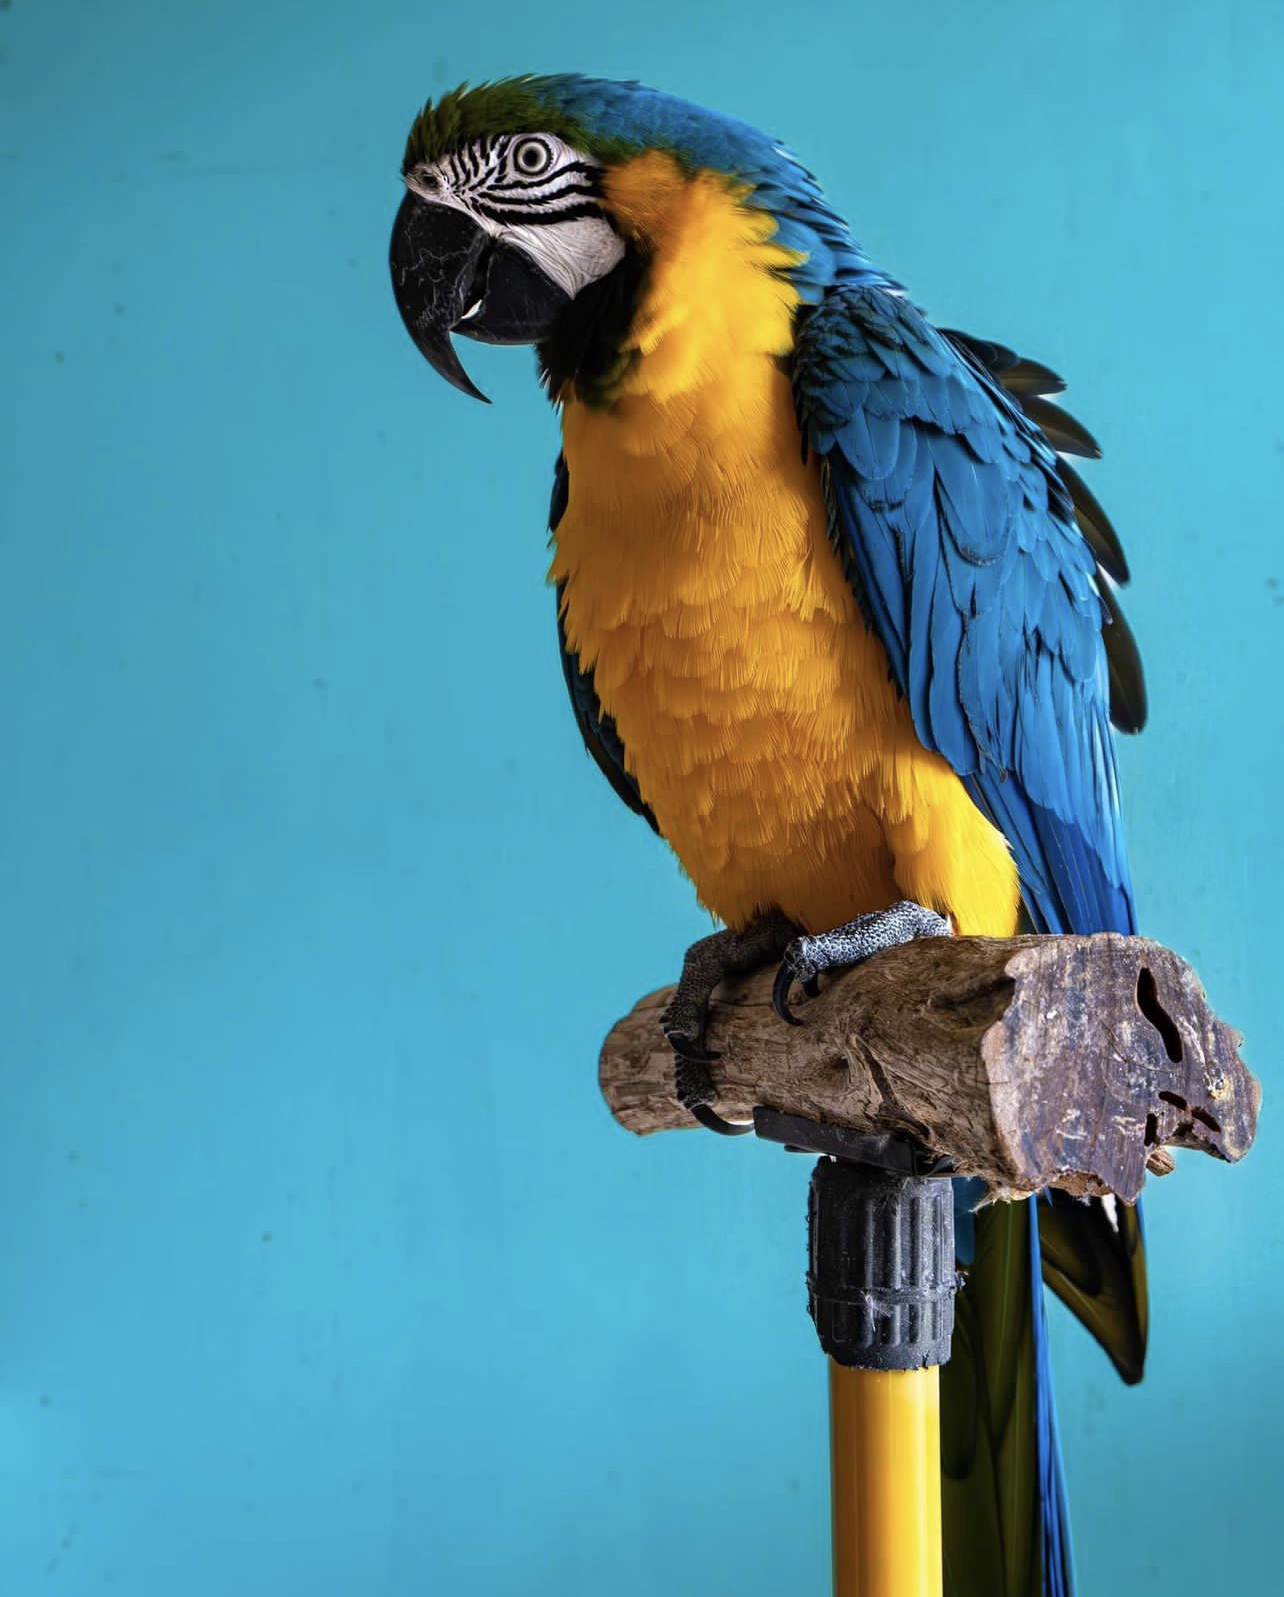 Green wing macaw for sale